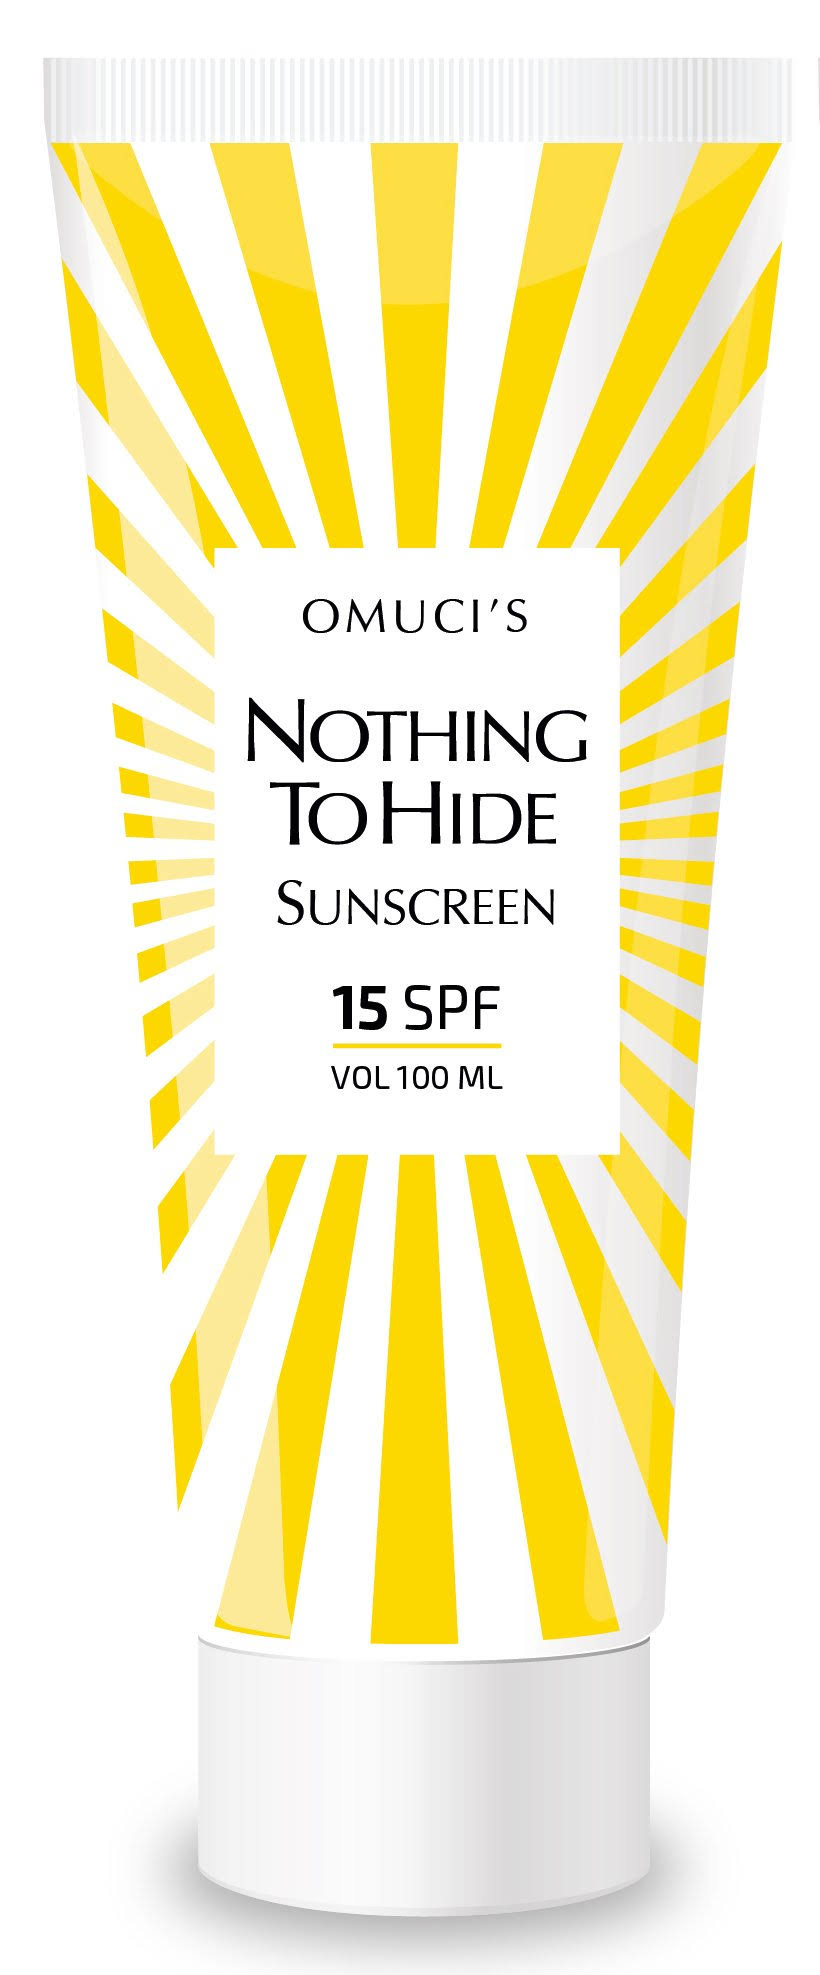 Omucis Nothing to Hide Eco Friendly Sunscreen. Vegan Friendly, Natural Ingredients. UVA + UVB Protection (100 mL, 15 SPF)